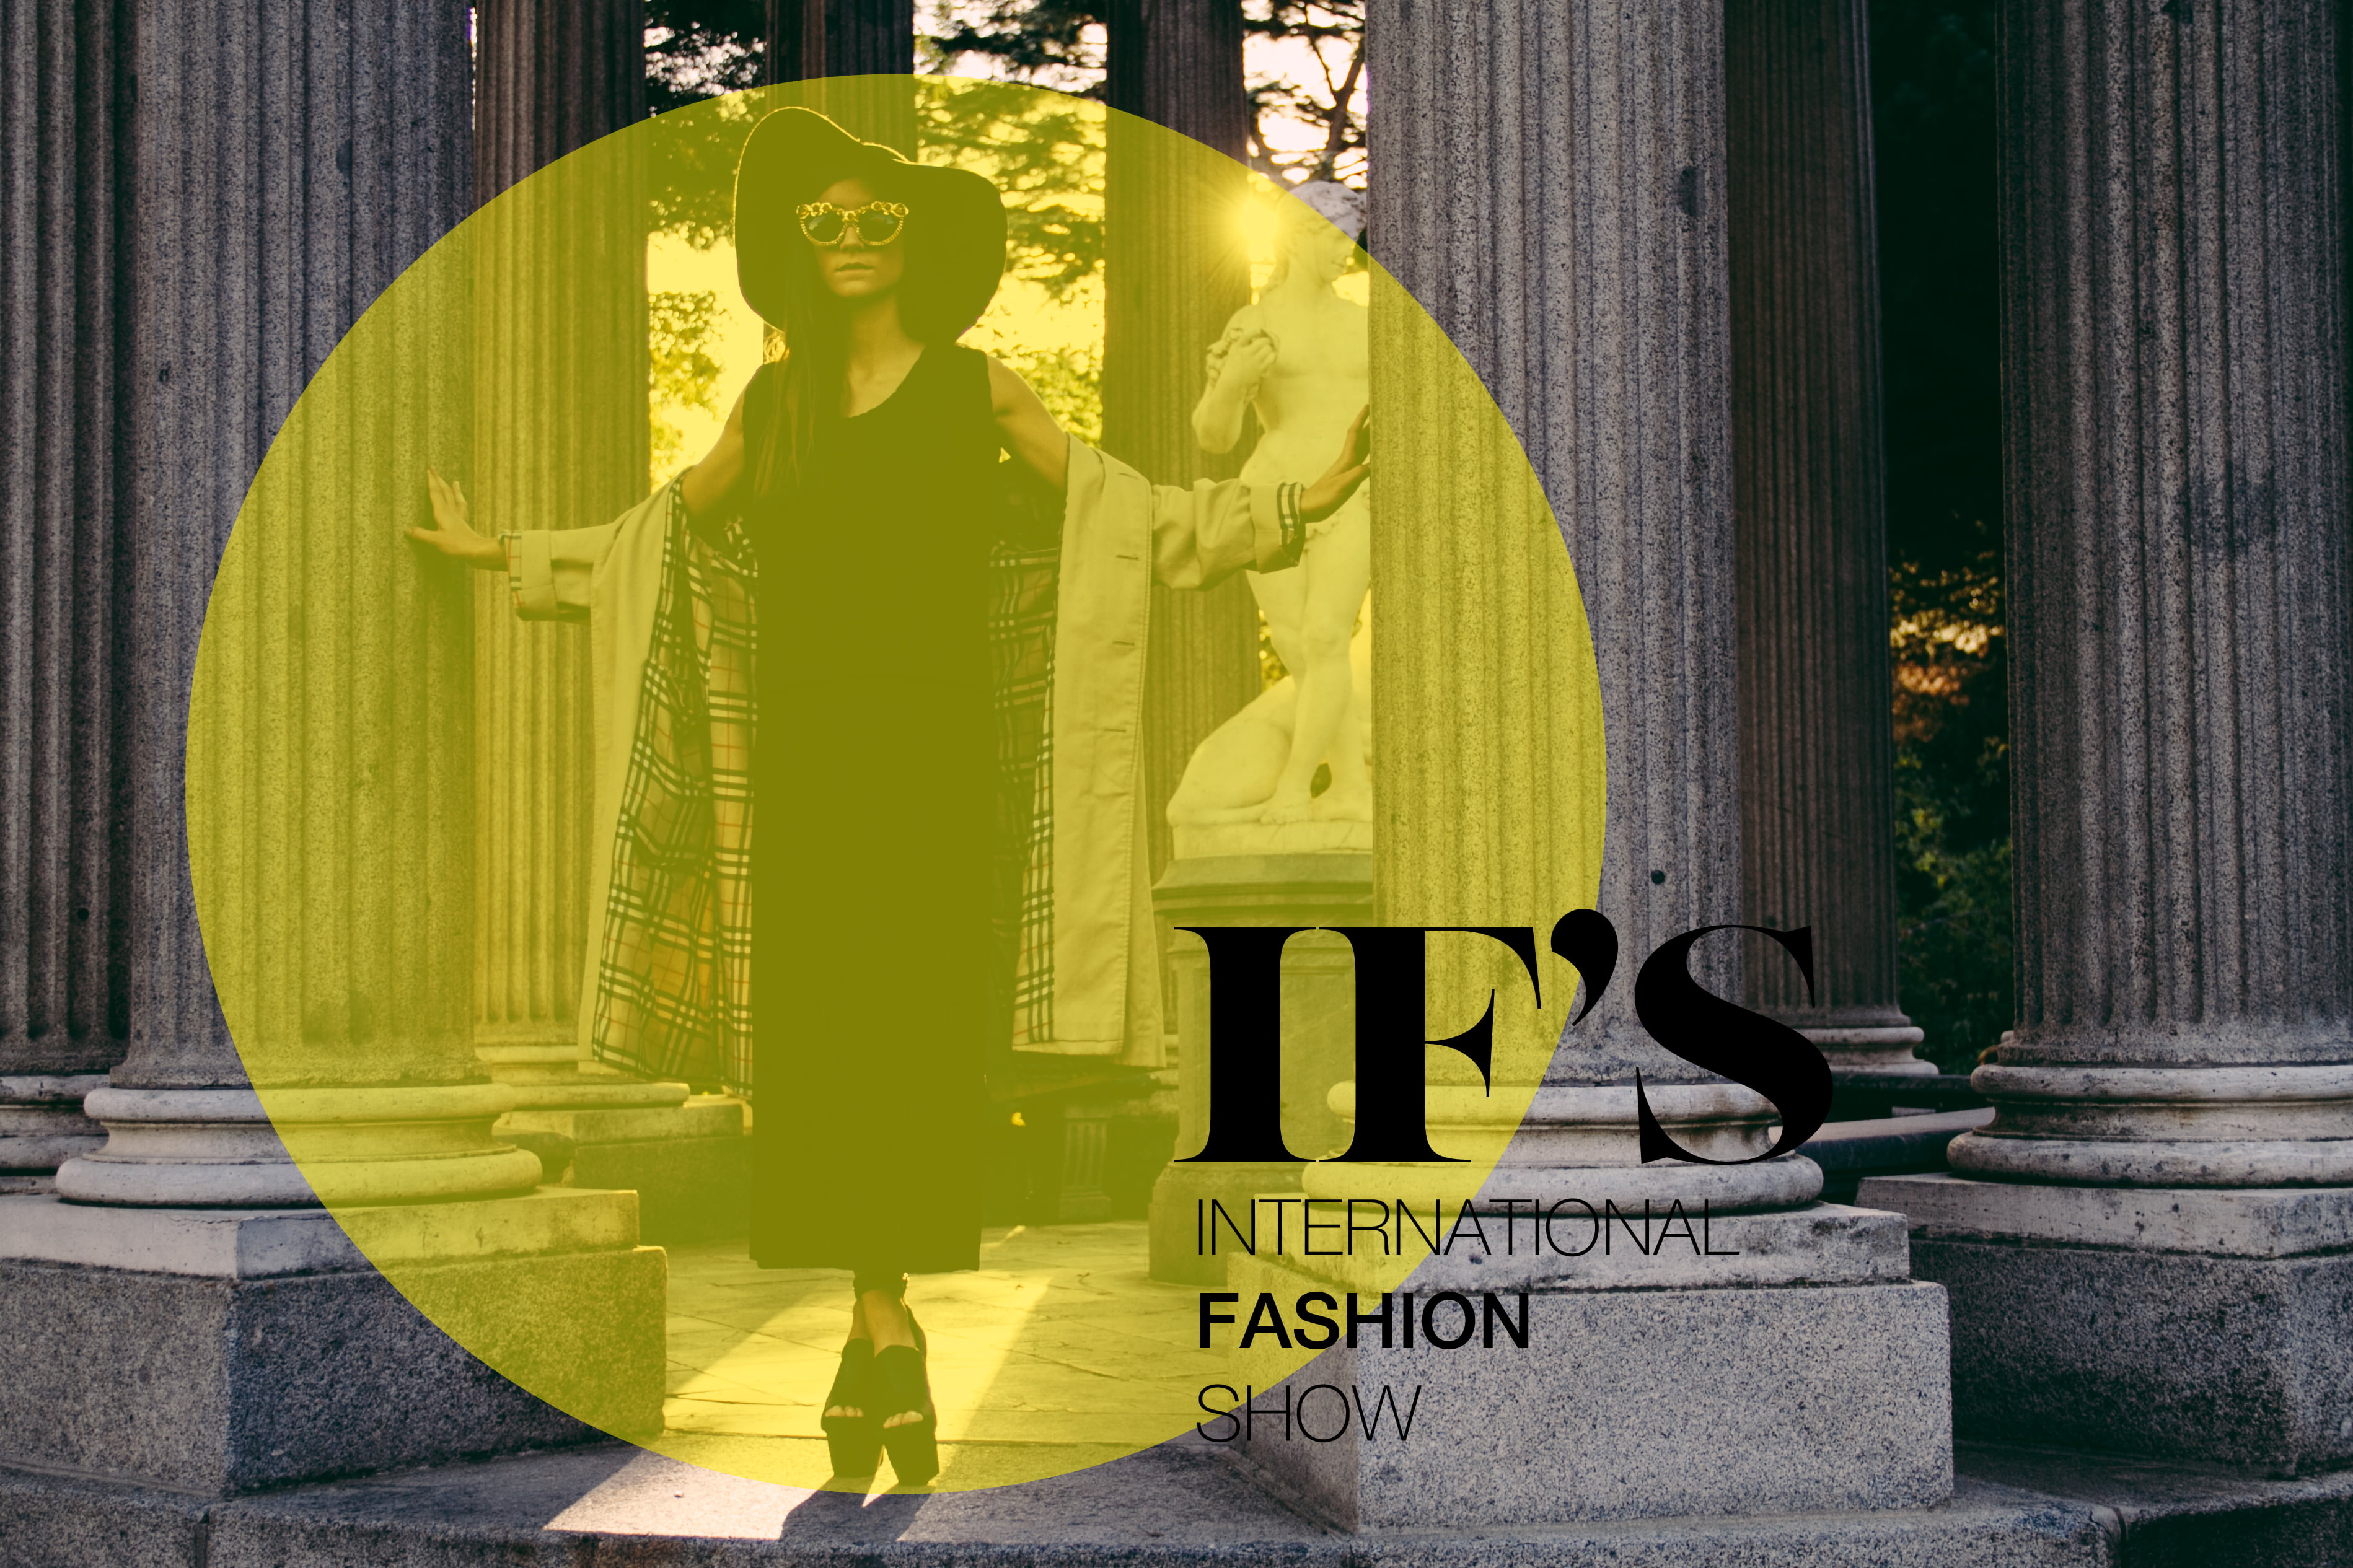 You are currently viewing Pronto! International Fashion show Chile @IFSChile